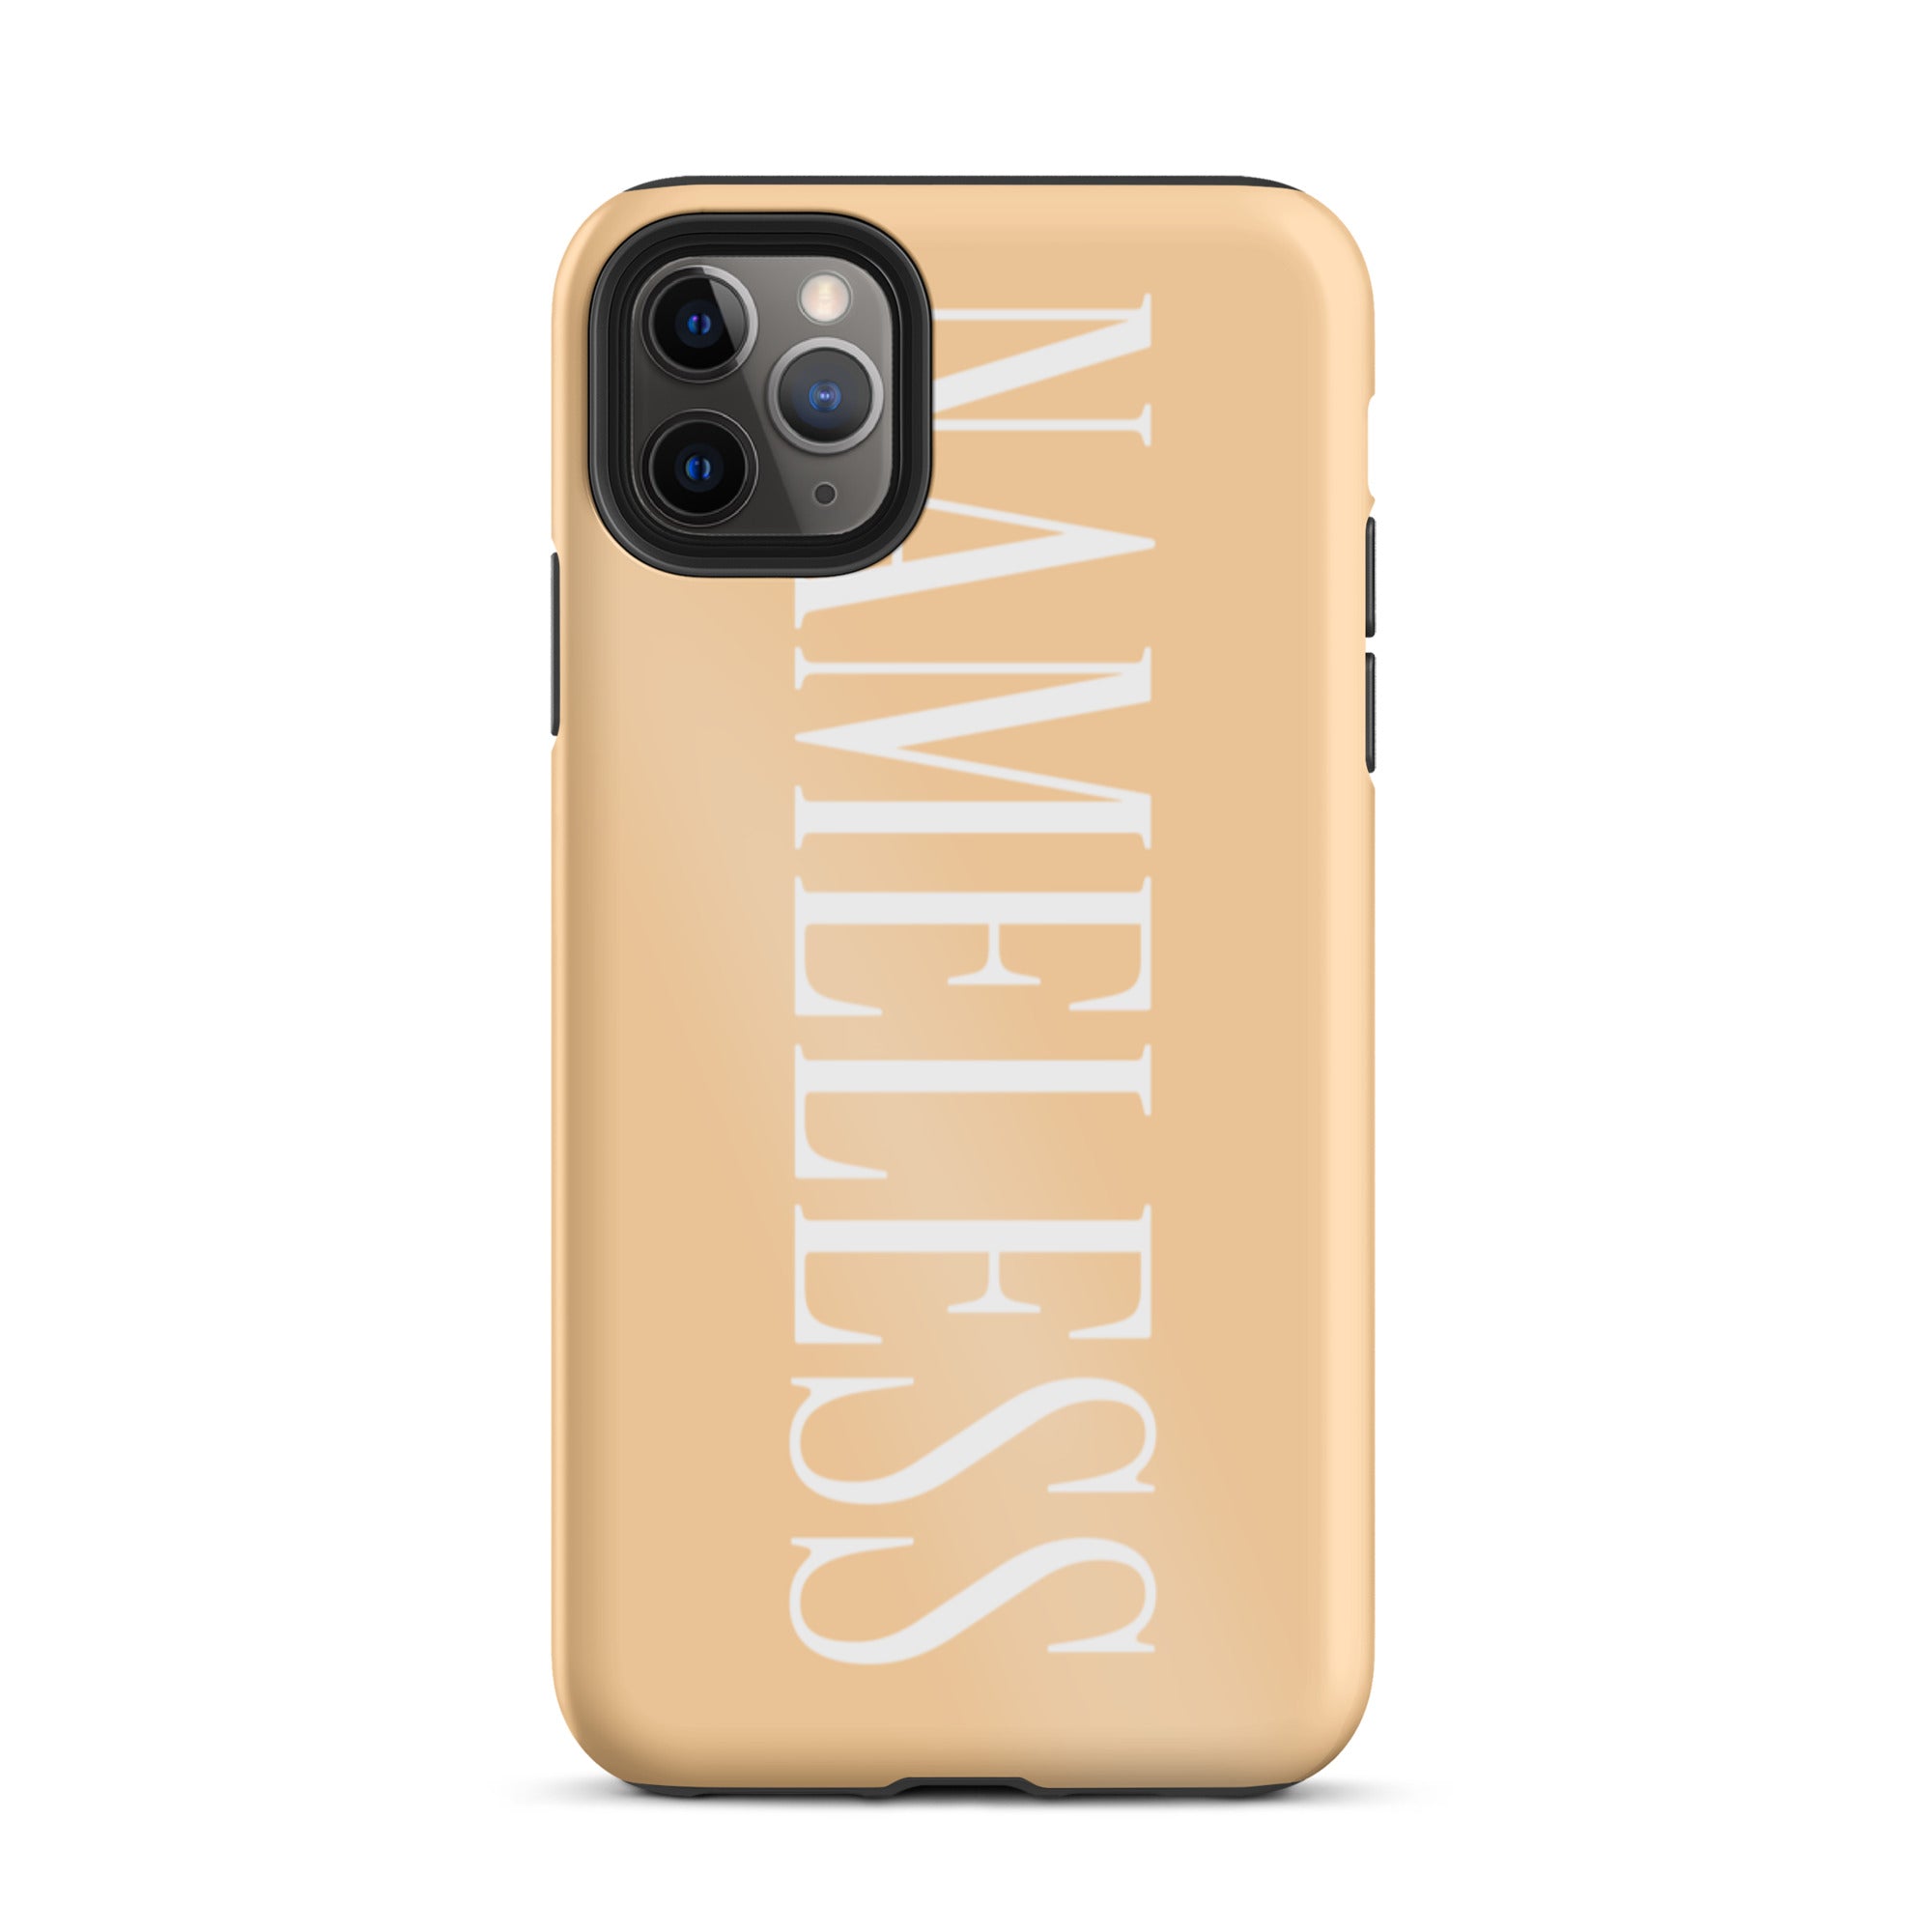 NAMELESS IPHONE CASE [NUDE]